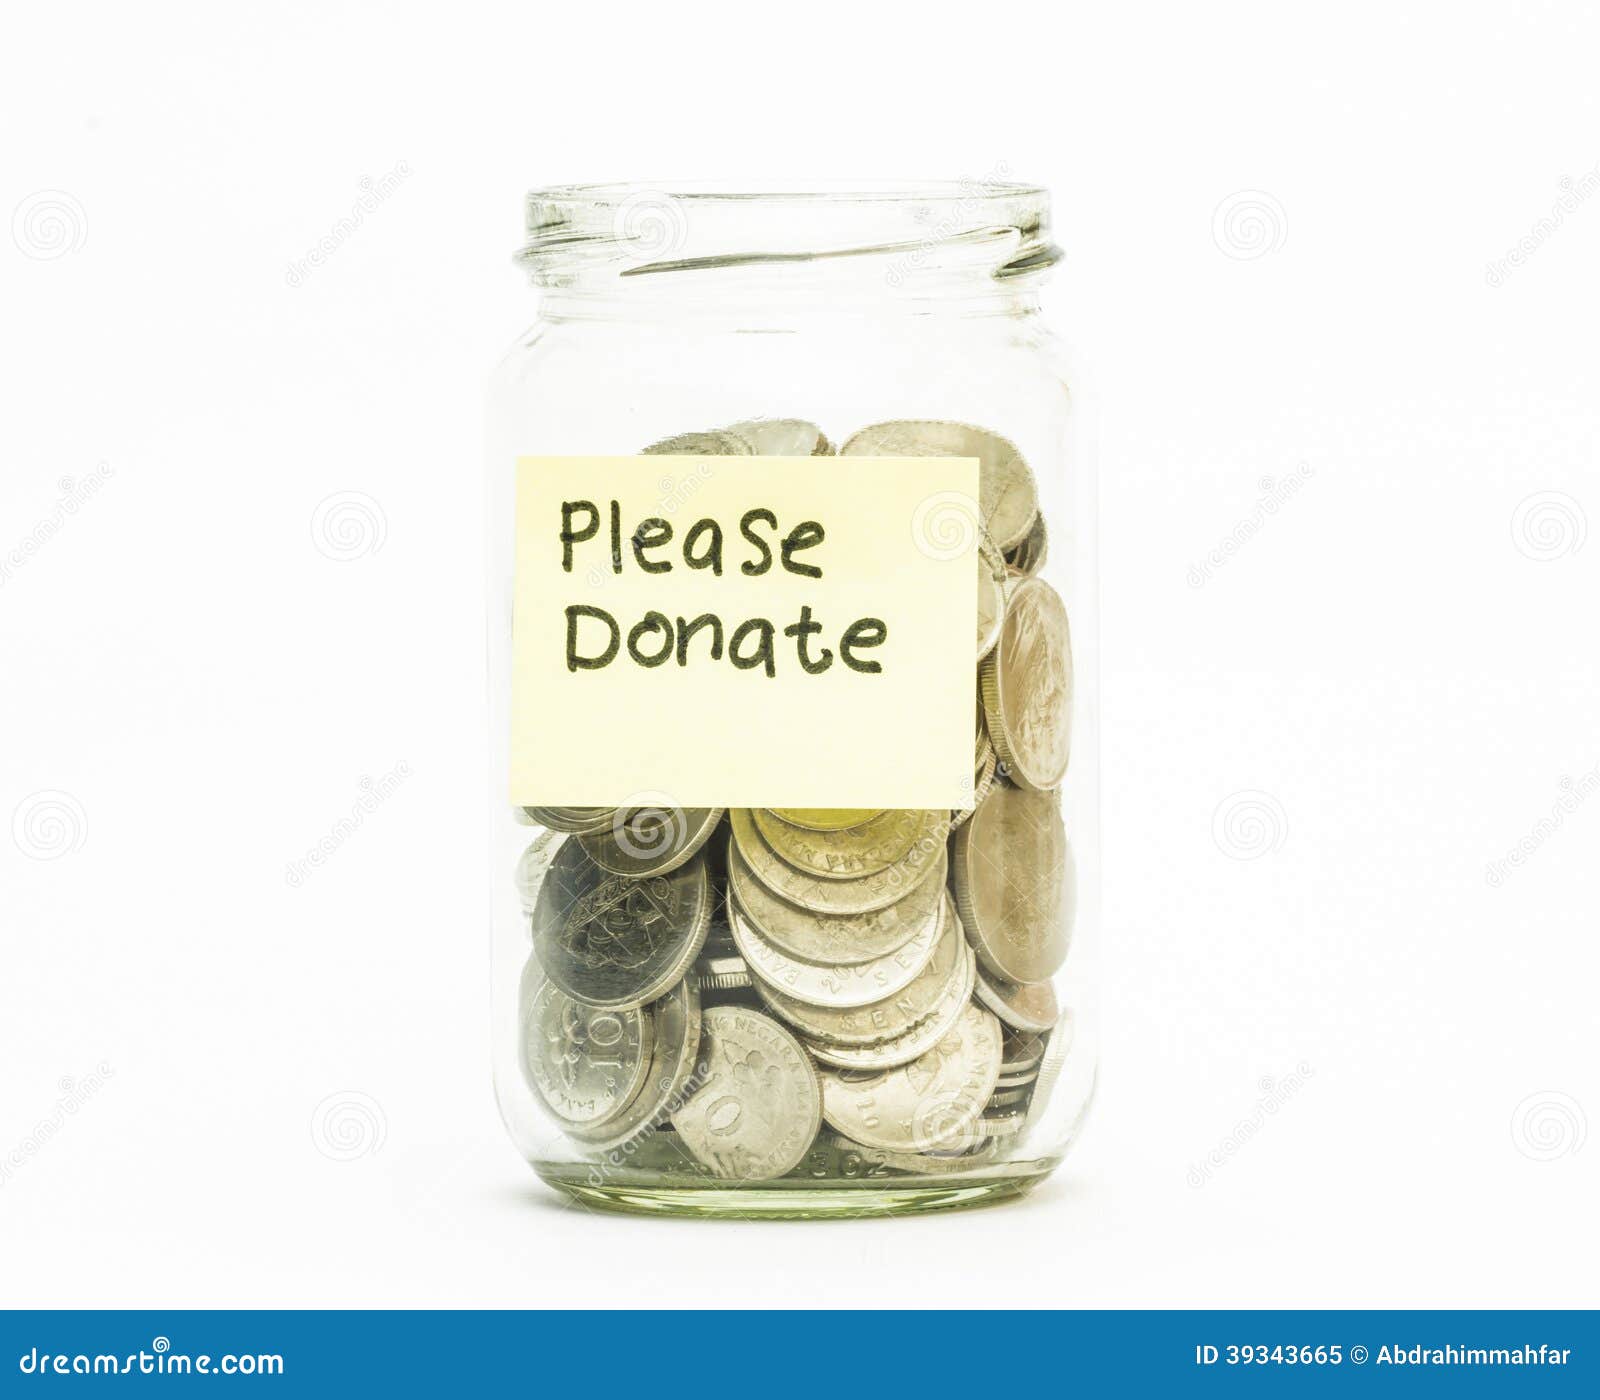 Isolated Coins In Jar With Please Donate Label Stock Image